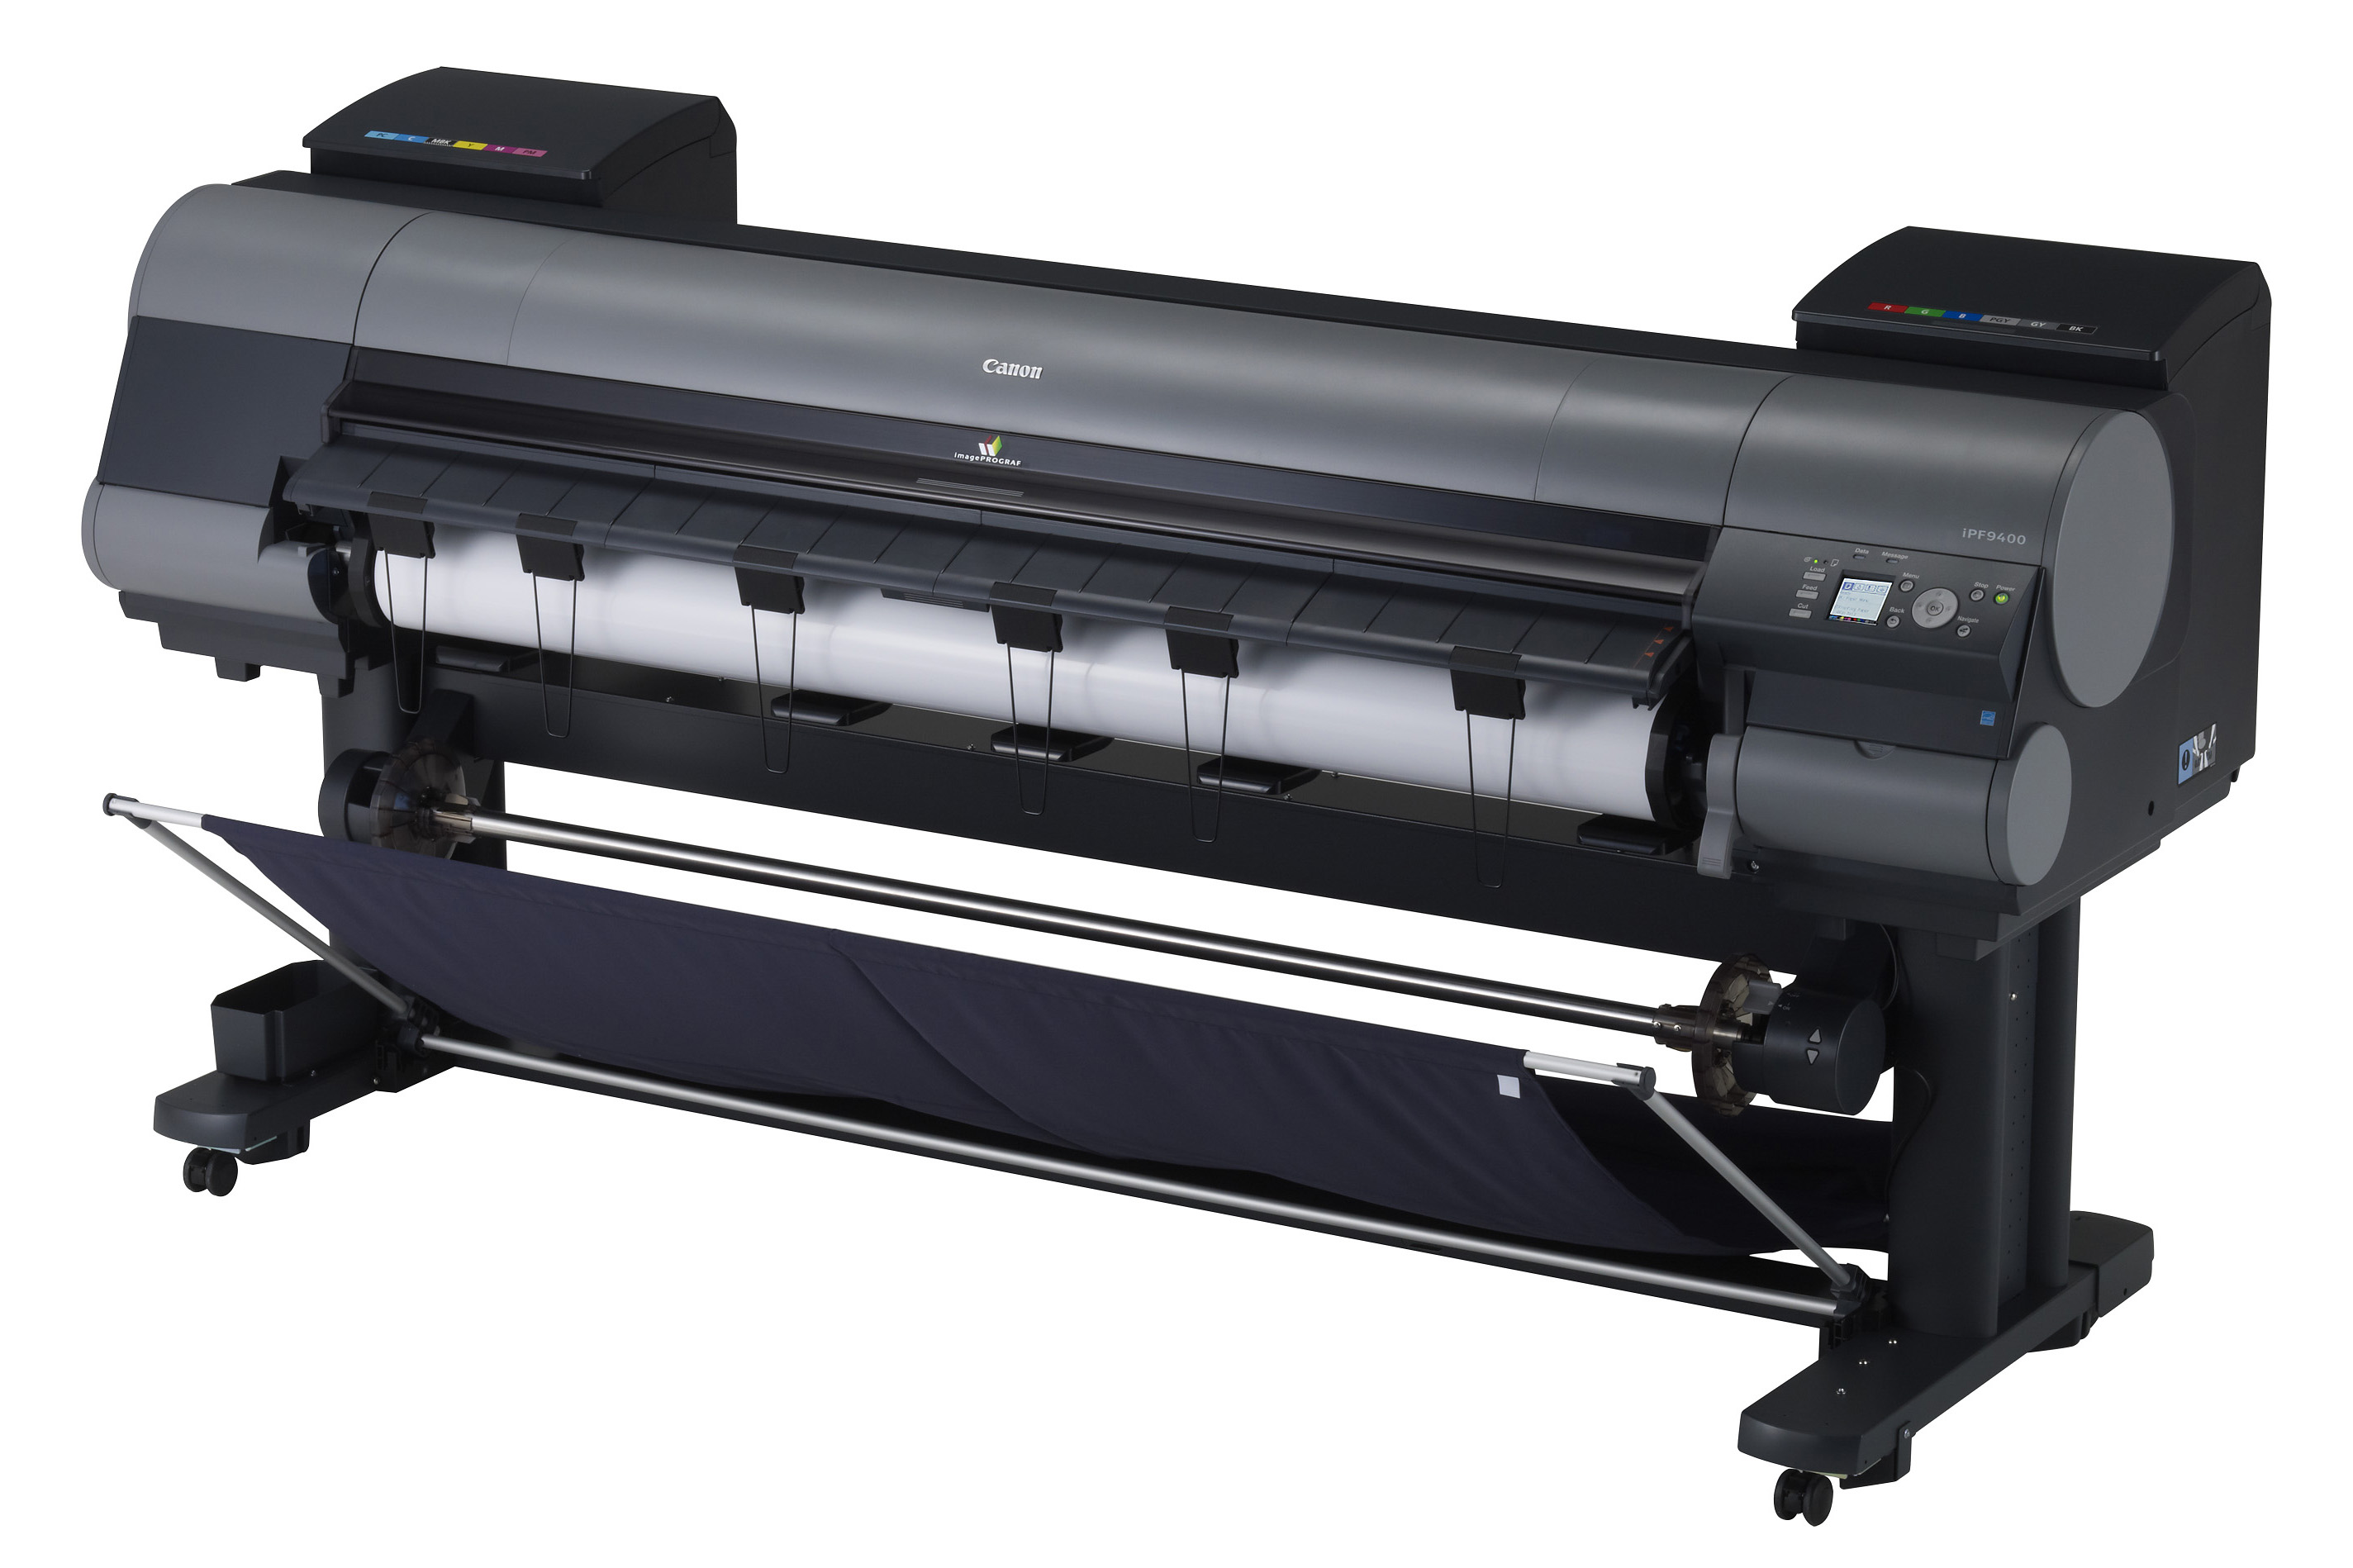 new-canon-inkjet-printer-mail-in-rebates-of-up-to-1-400-at-lexjet